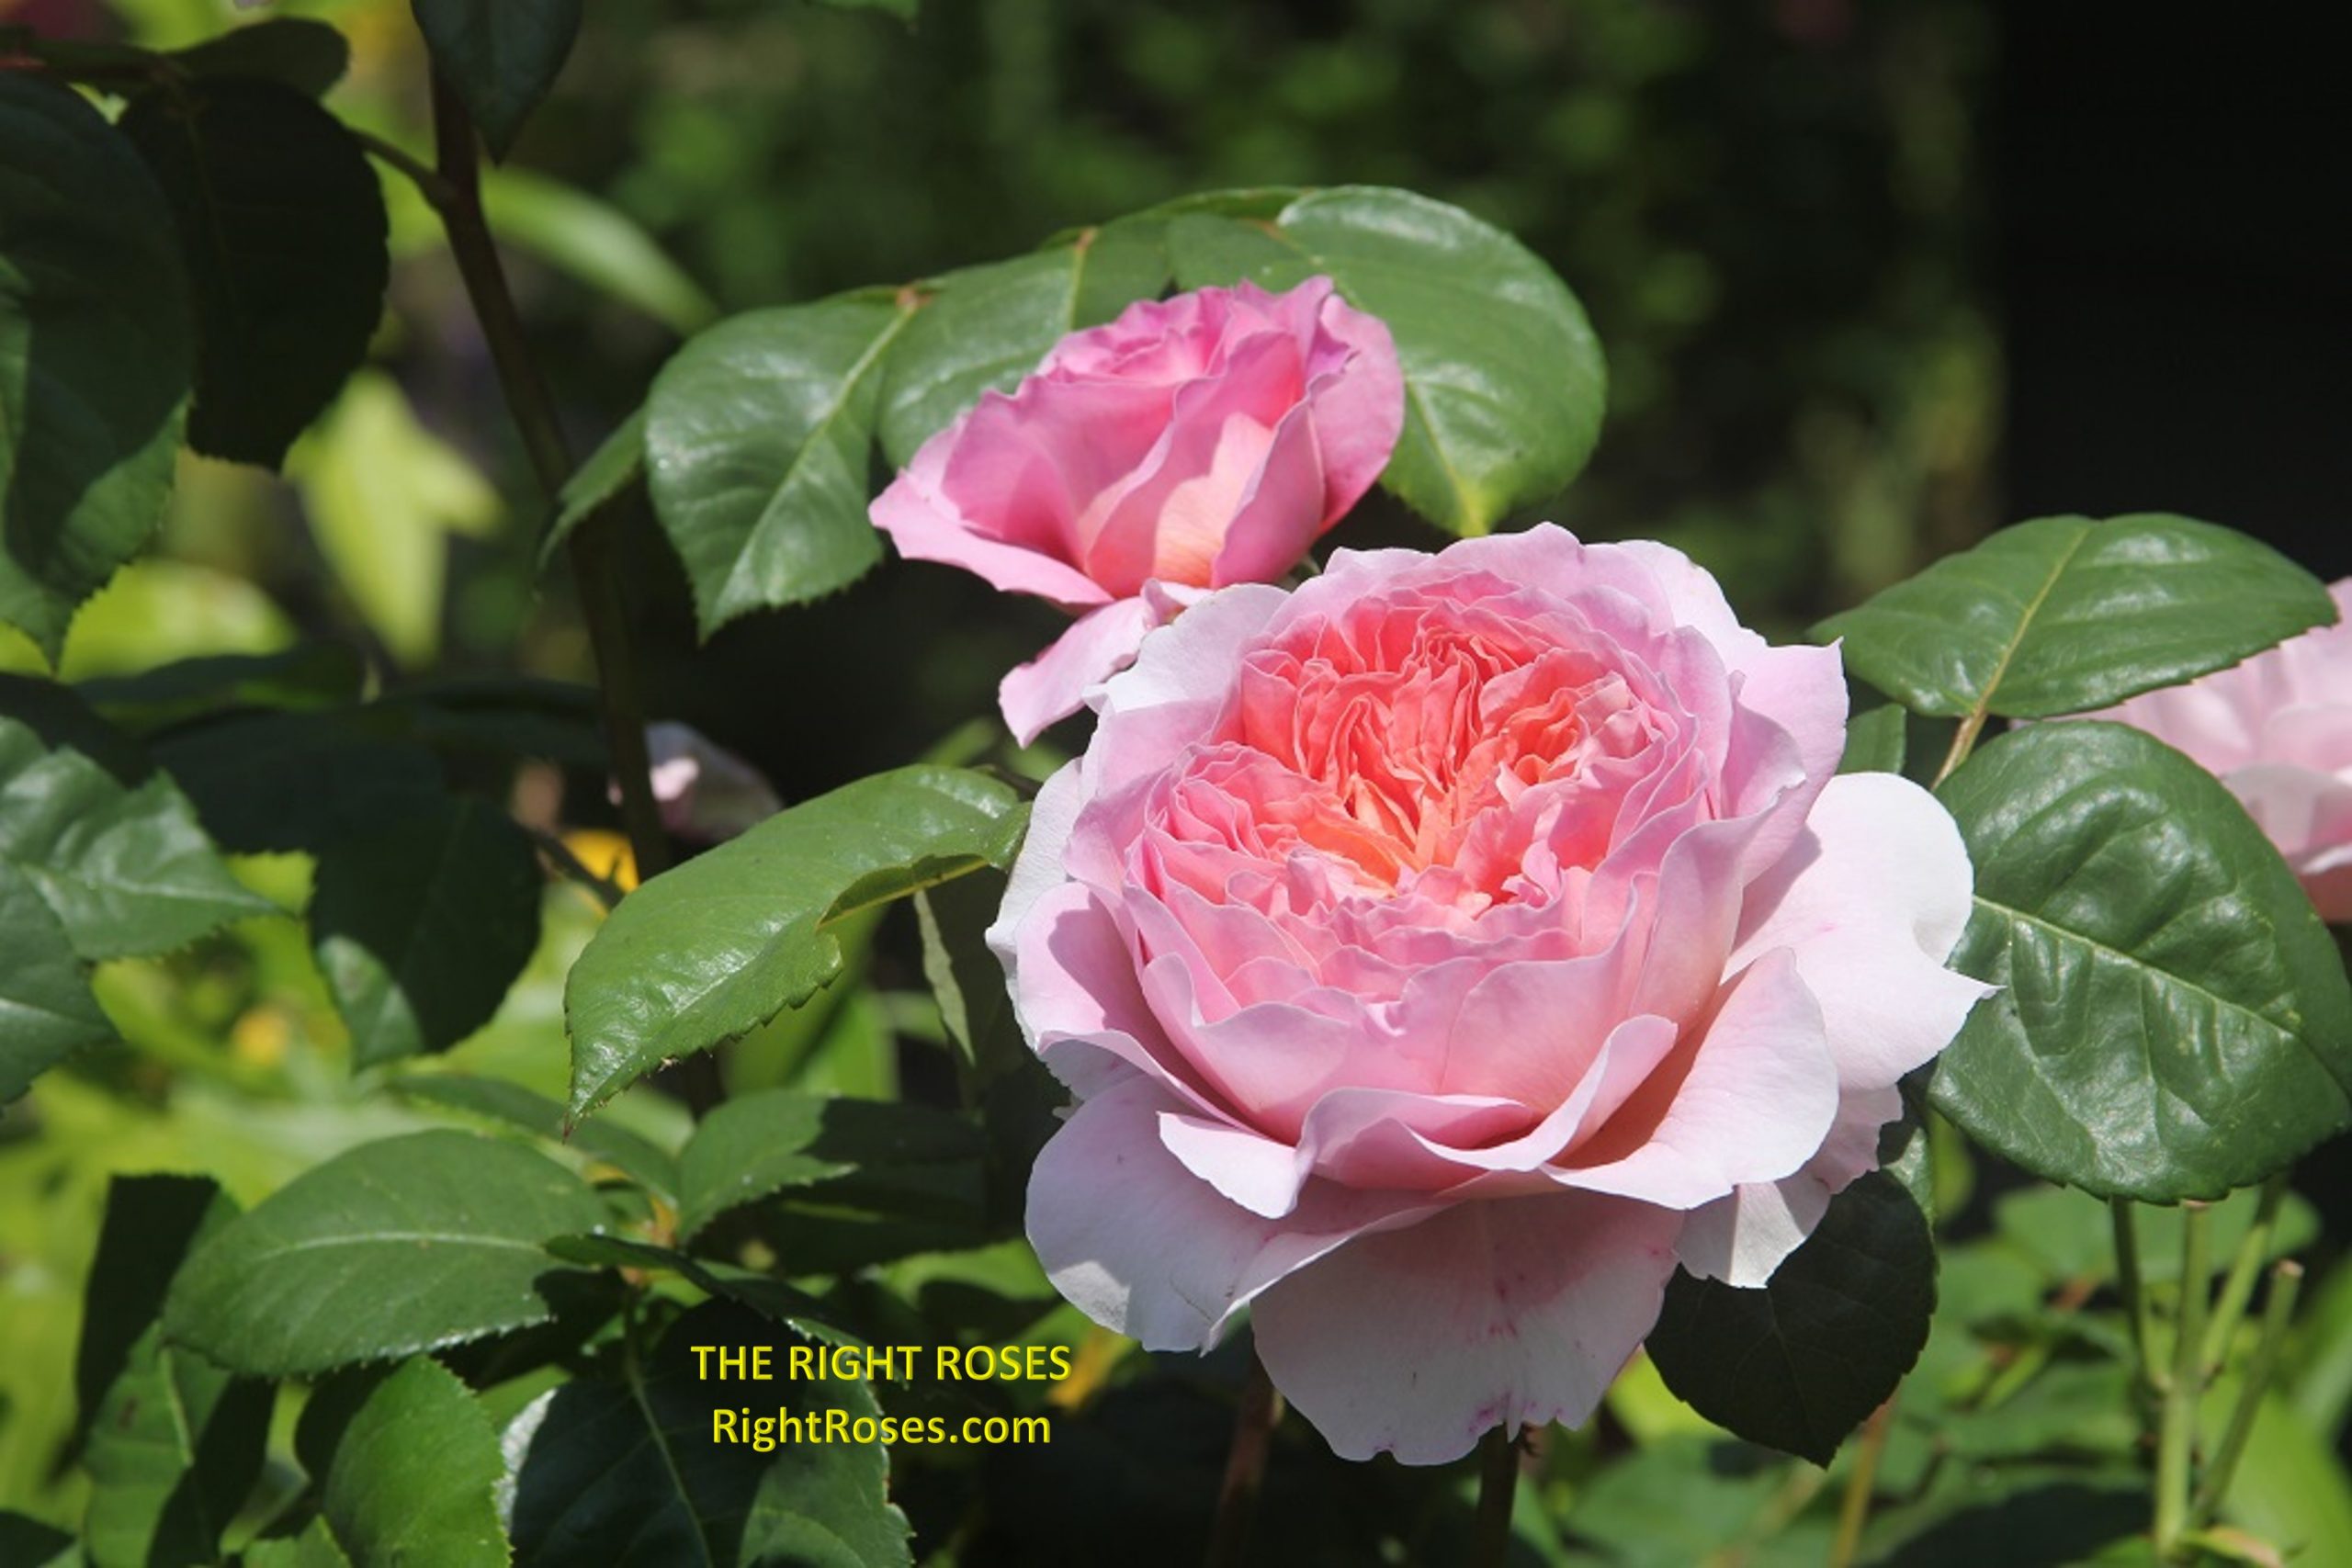 The Right Roses presents you with the best rose review of rose 'Eisvogel' | Rosen Tantau 2016 (year 3). Millions of gardeners from all over the world have trusted our in-depth reviews. The Right Roses team uses our own, bespoke The Right Roses Score, which is the most comprehensive rose rating system in the world, to assess the overall quality of a rose. We review all the very best roses from all the best rose breeders such as Rosen Kordes, Rosen Tantau, Delbard, David Austin Roses. The Right Roses is also running the best gardening club for the very best connoisseur gardeners and garden designers at Righttify.com. At Righttify.com, connoisseur sellers can design gardens, provide gardening services, and provide garden consulting services.